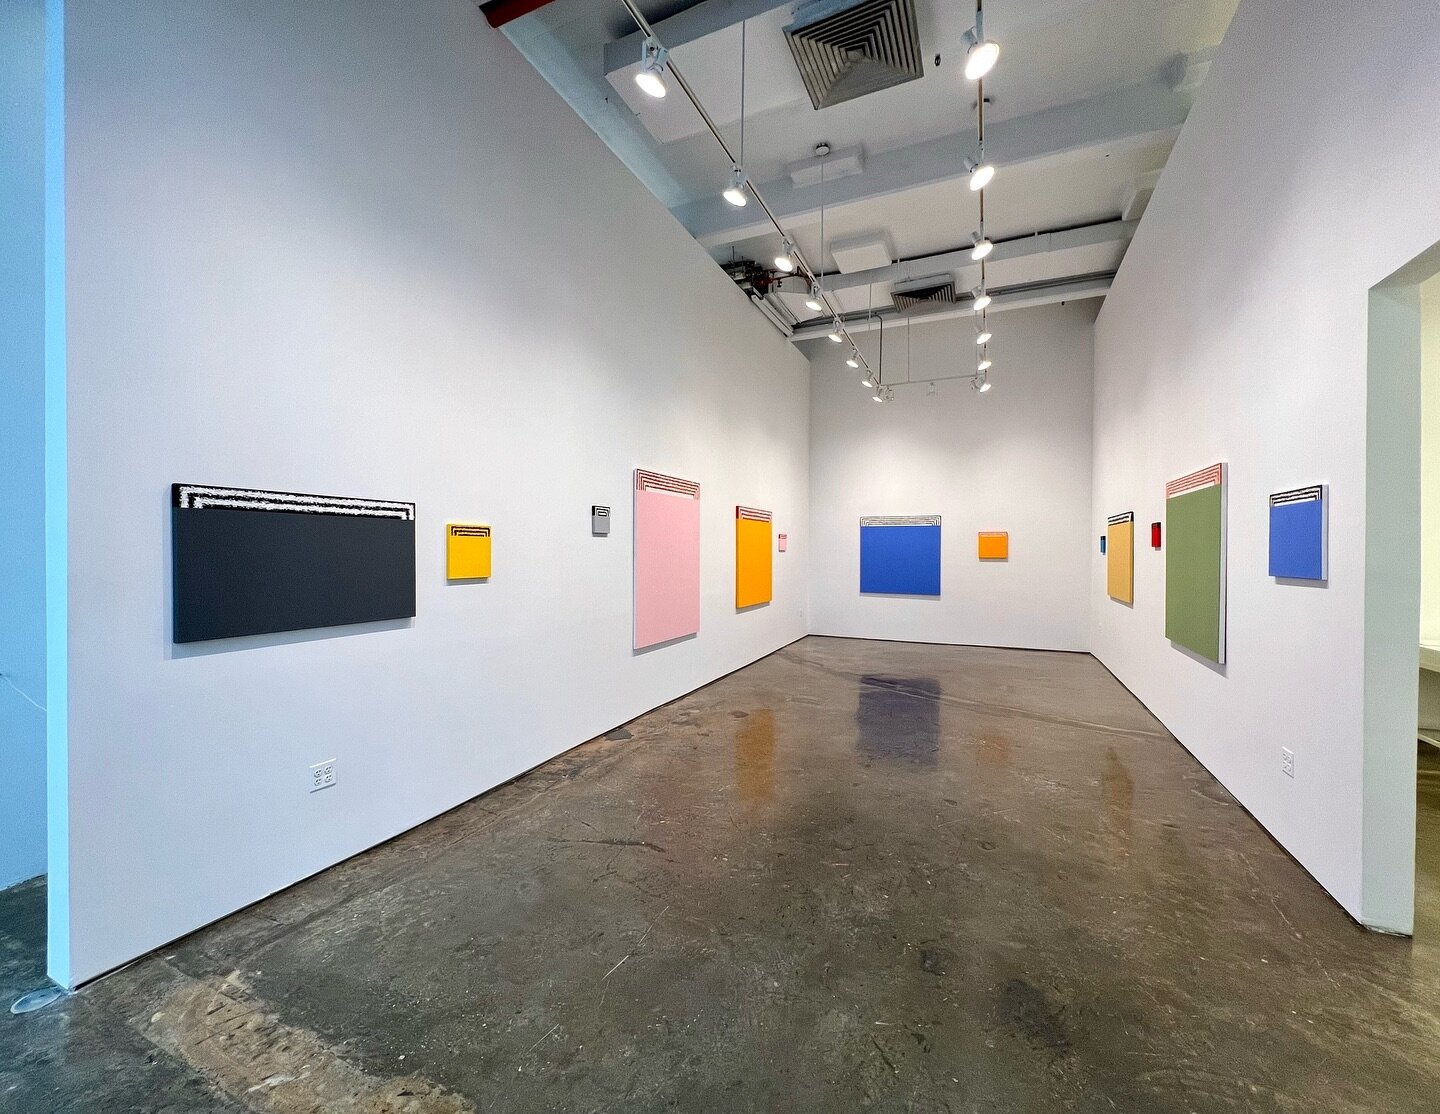 Yo Brooklyn! Stop in today to see Sharon Brant&rsquo;s vibrant new exhibition &ldquo;Change and Recurrence&rdquo;. Our Saturday gallery hours are 11am-5pm. 😎

For more than five decades, Sharon Brant has produced conceptually and aesthetically rigor